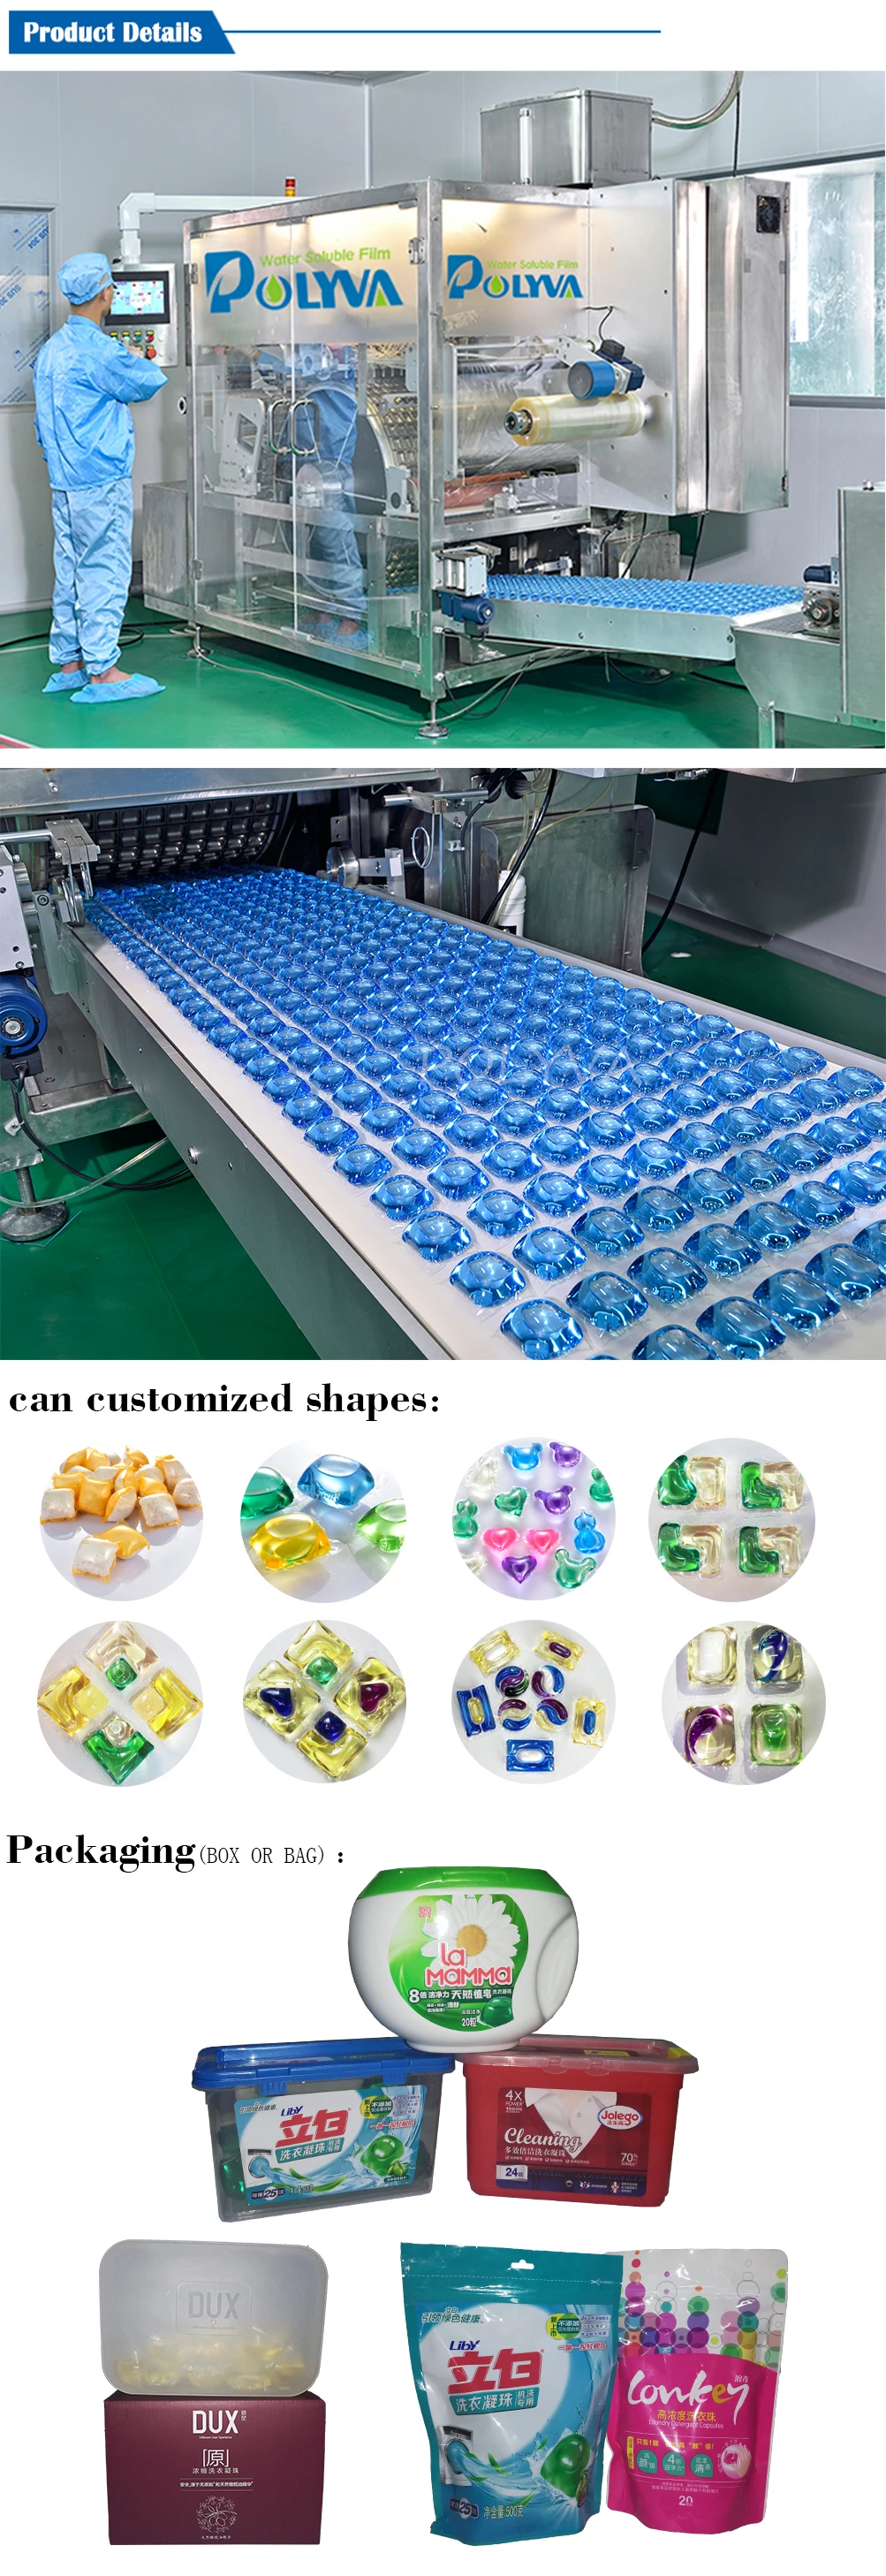 2019 new product CHINA FACTORY OEM laundry detergent pods washing capsules of cleaner